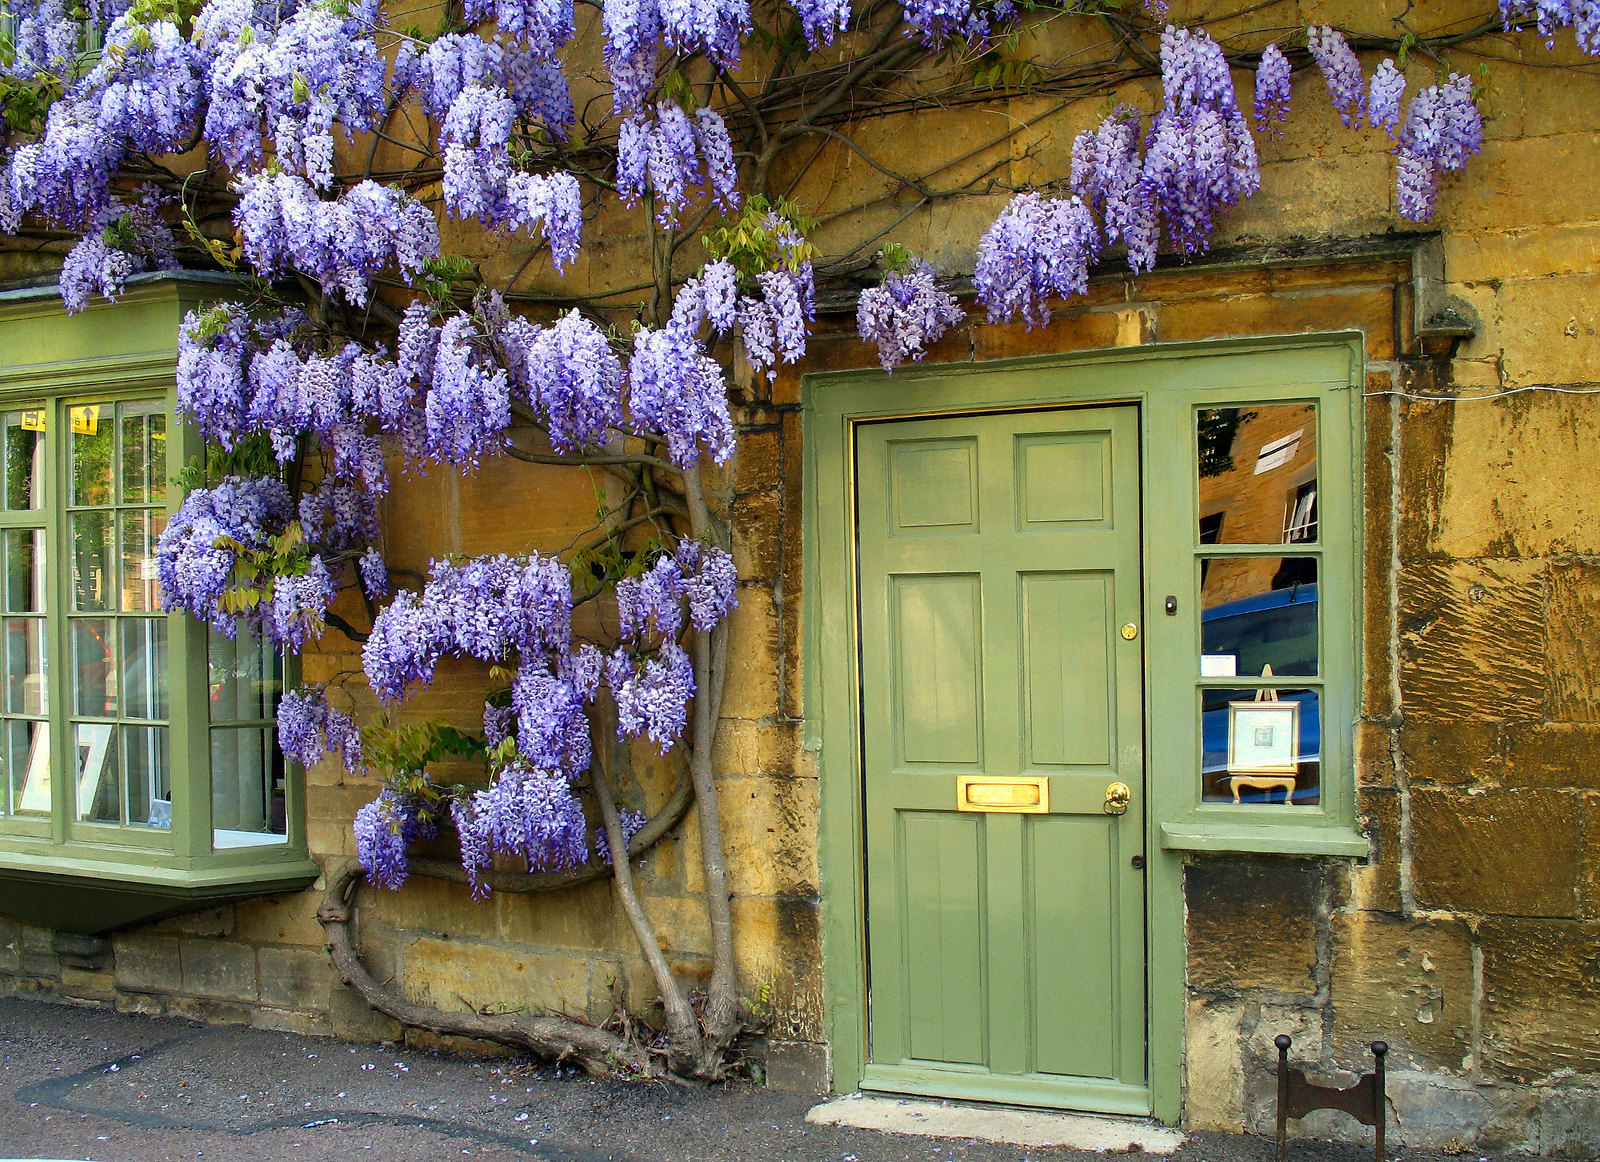 A cottage in Moreton-in-Marsh with wisteria growing round the front door